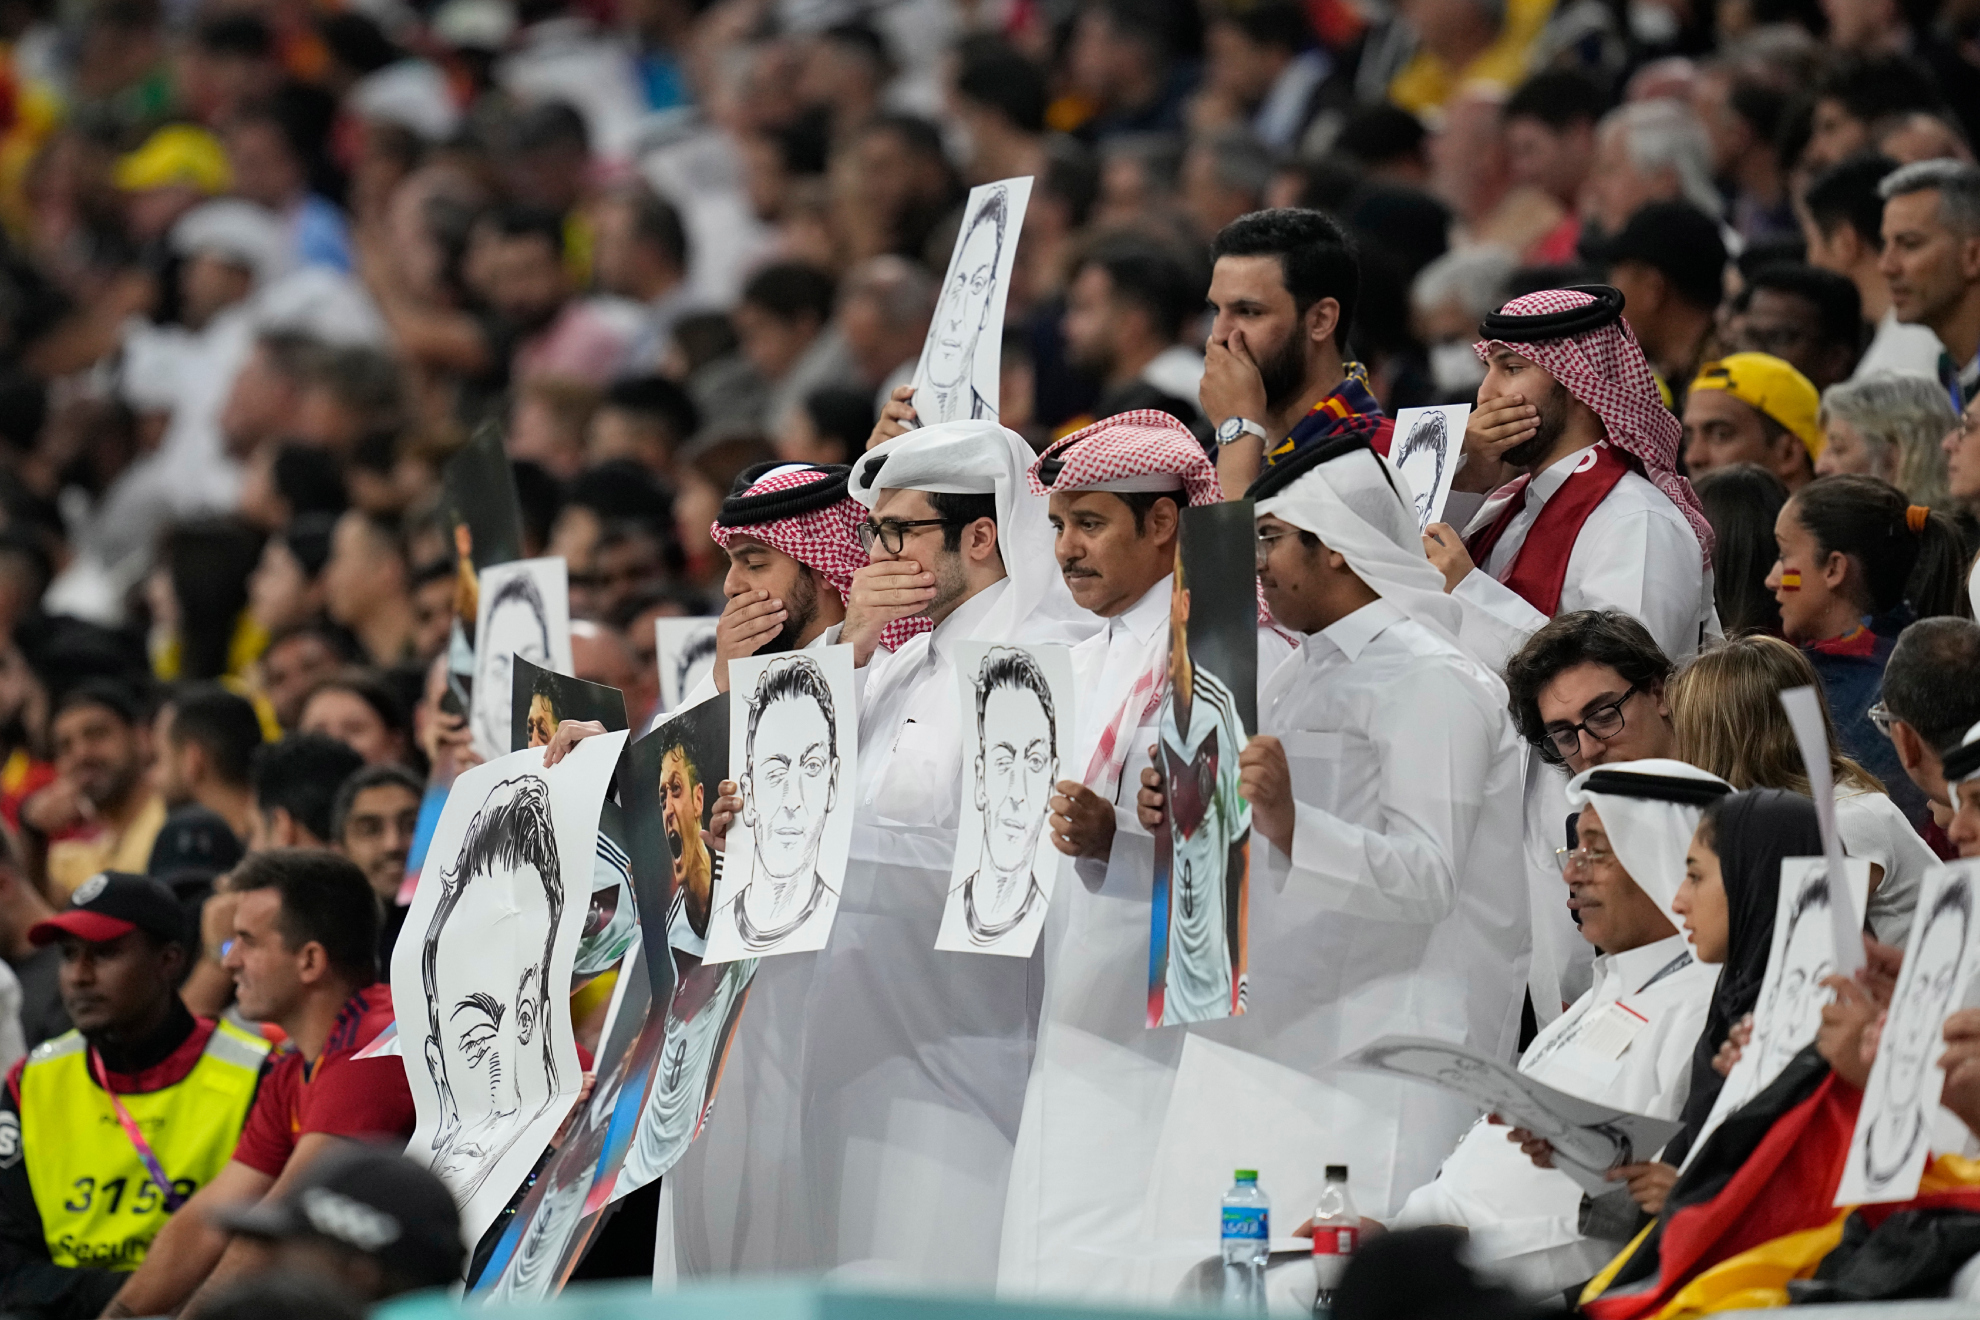 Qatar fans with images of Ozil during Spain vs Germany